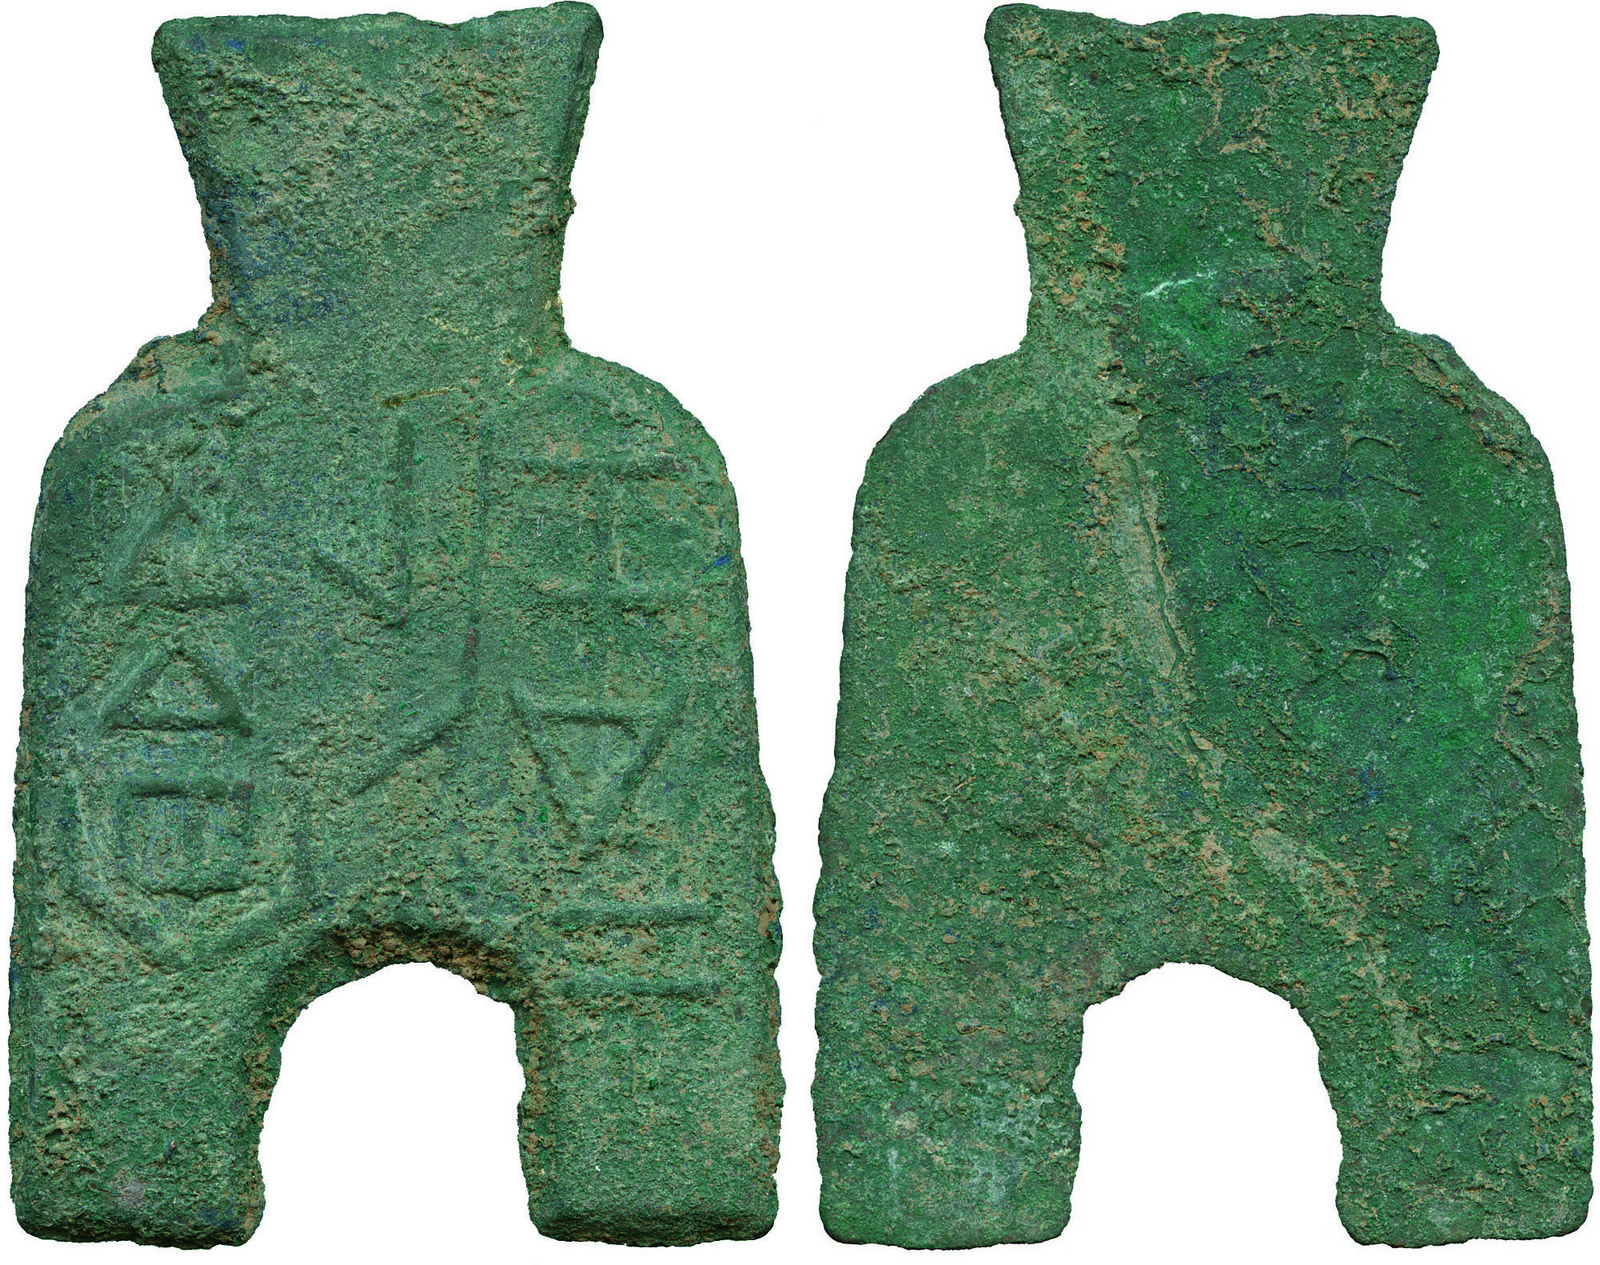 COINS, 錢幣, CHINA – ANCIENT中國 - 古代, Warring States 戰國: Bronze Round-shouldered Arch-footed Spade